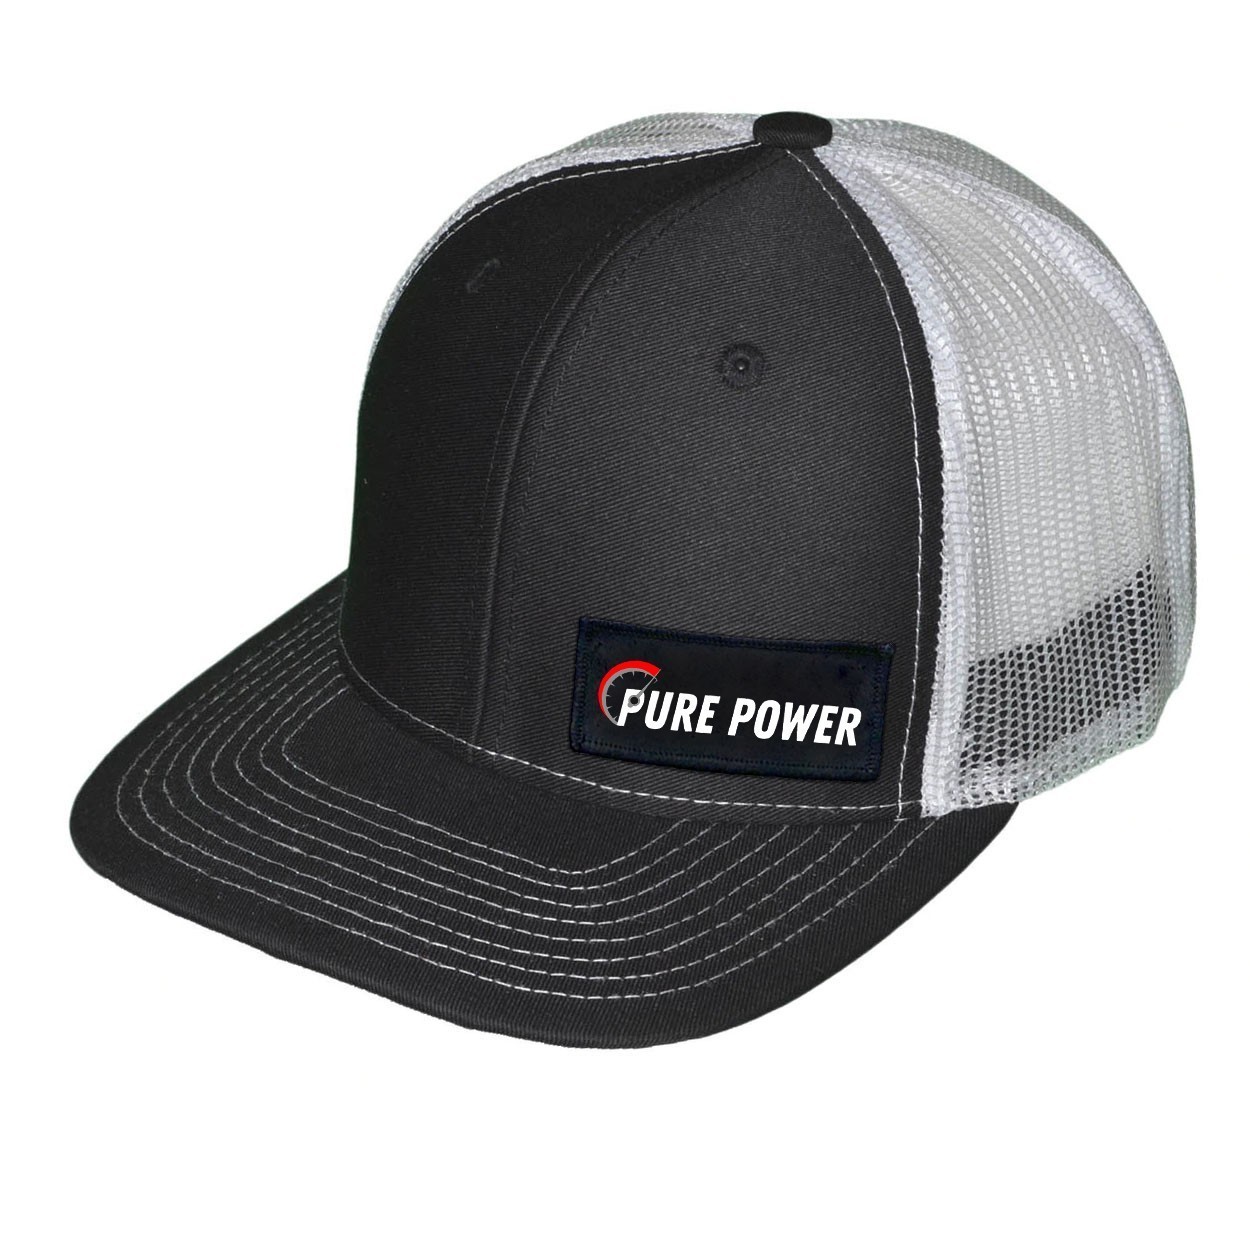 Ride Pure Power Logo Night Out Woven Patch Snapback Trucker Hat Black/White (White Logo)